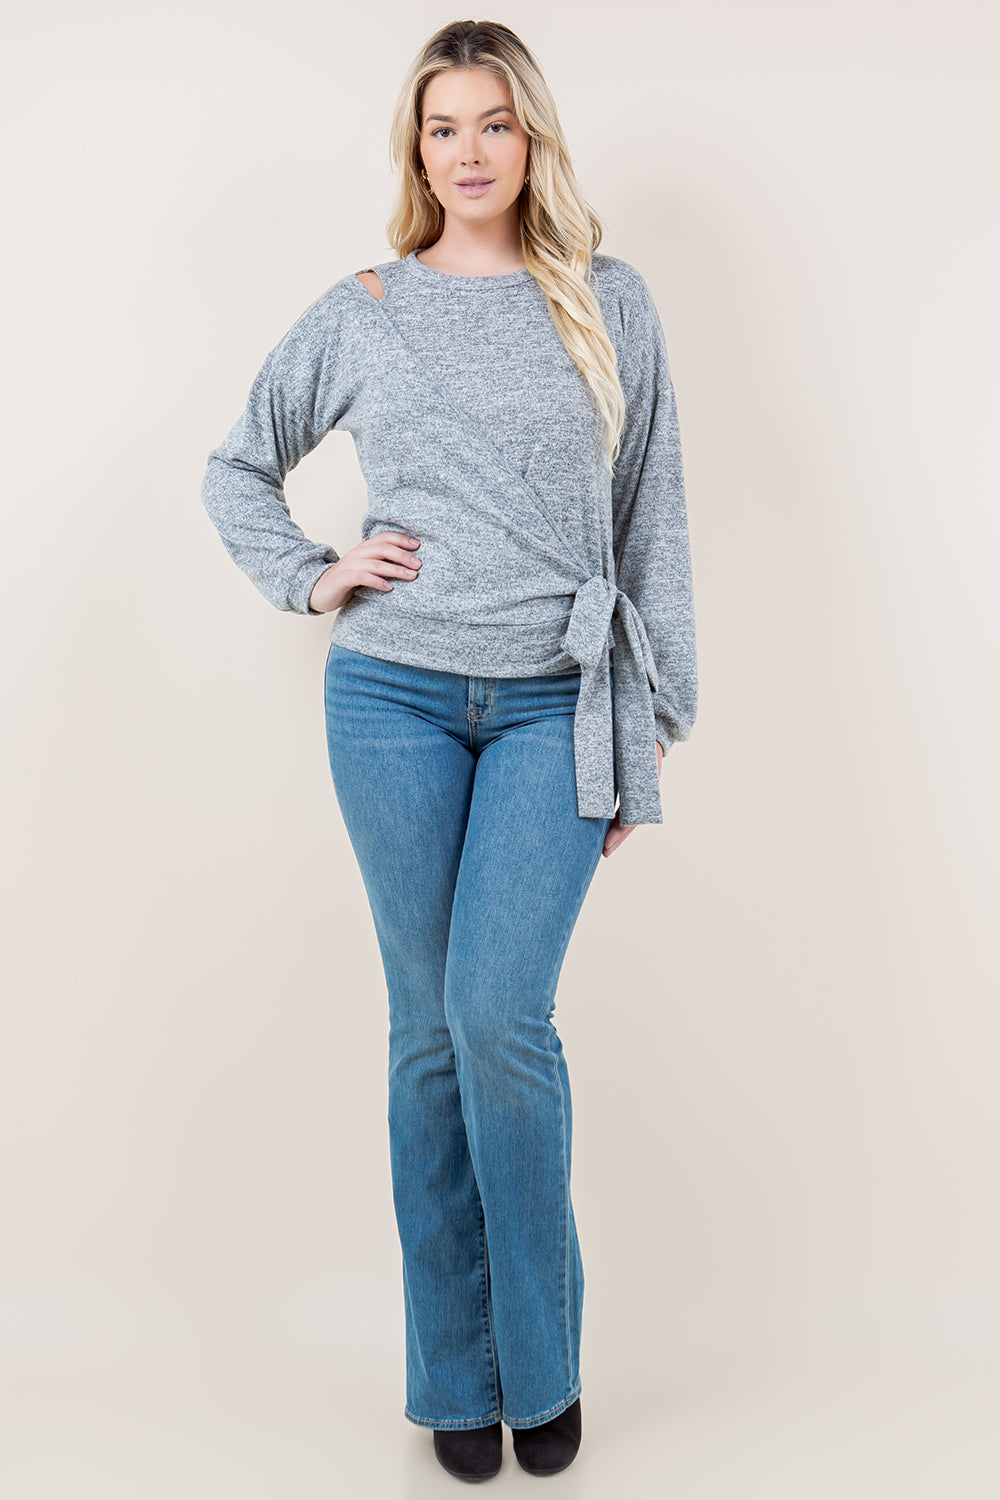 LS CUT OUT FAUX WRAP PULL OVER - T11651-2THACCI-H GREY